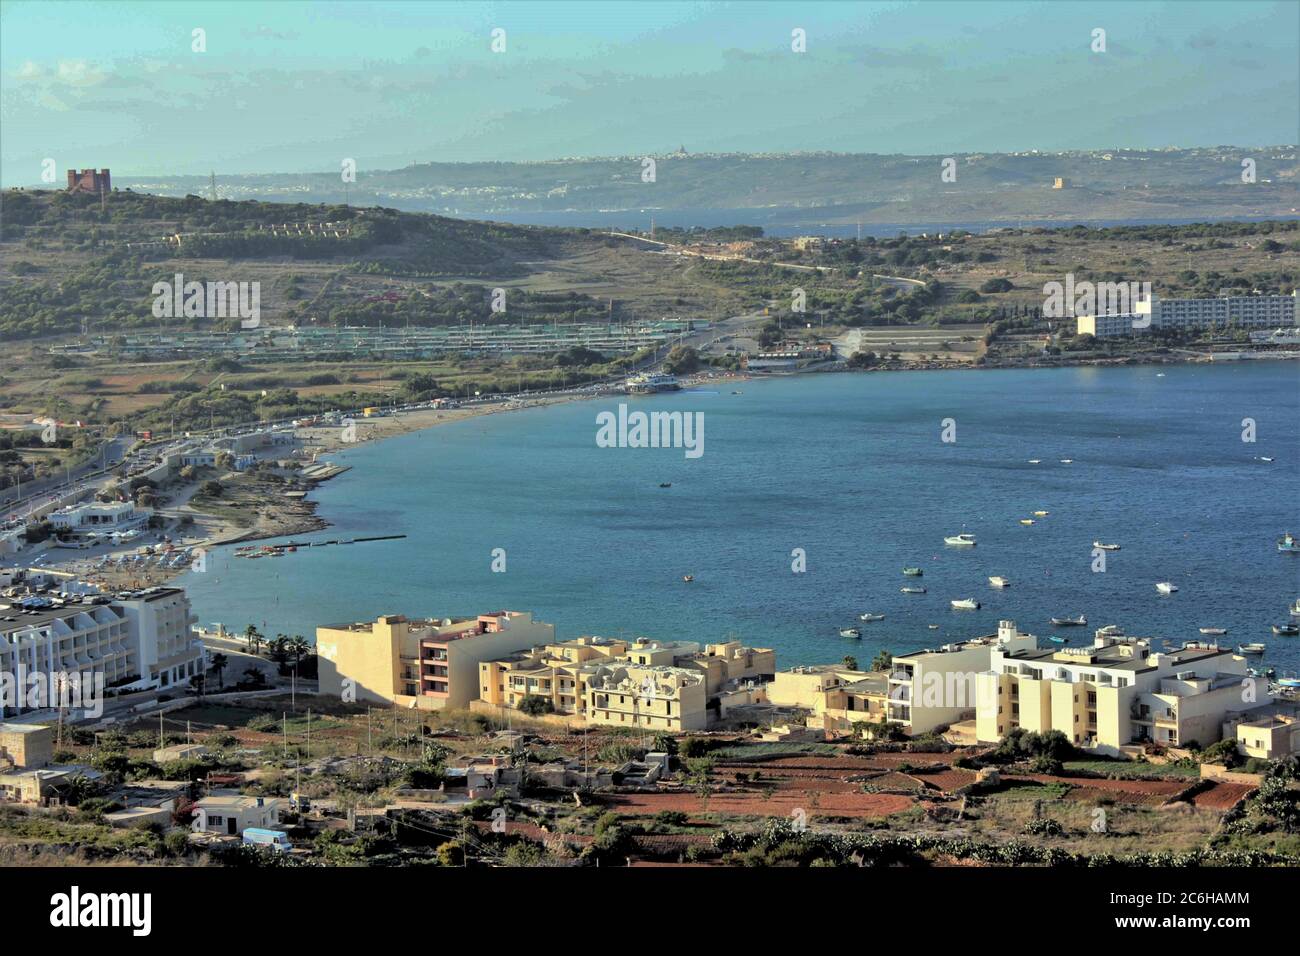 View to the Hotel area of Mellieha Town and across Mellieha Bay, Malta Stock Photo